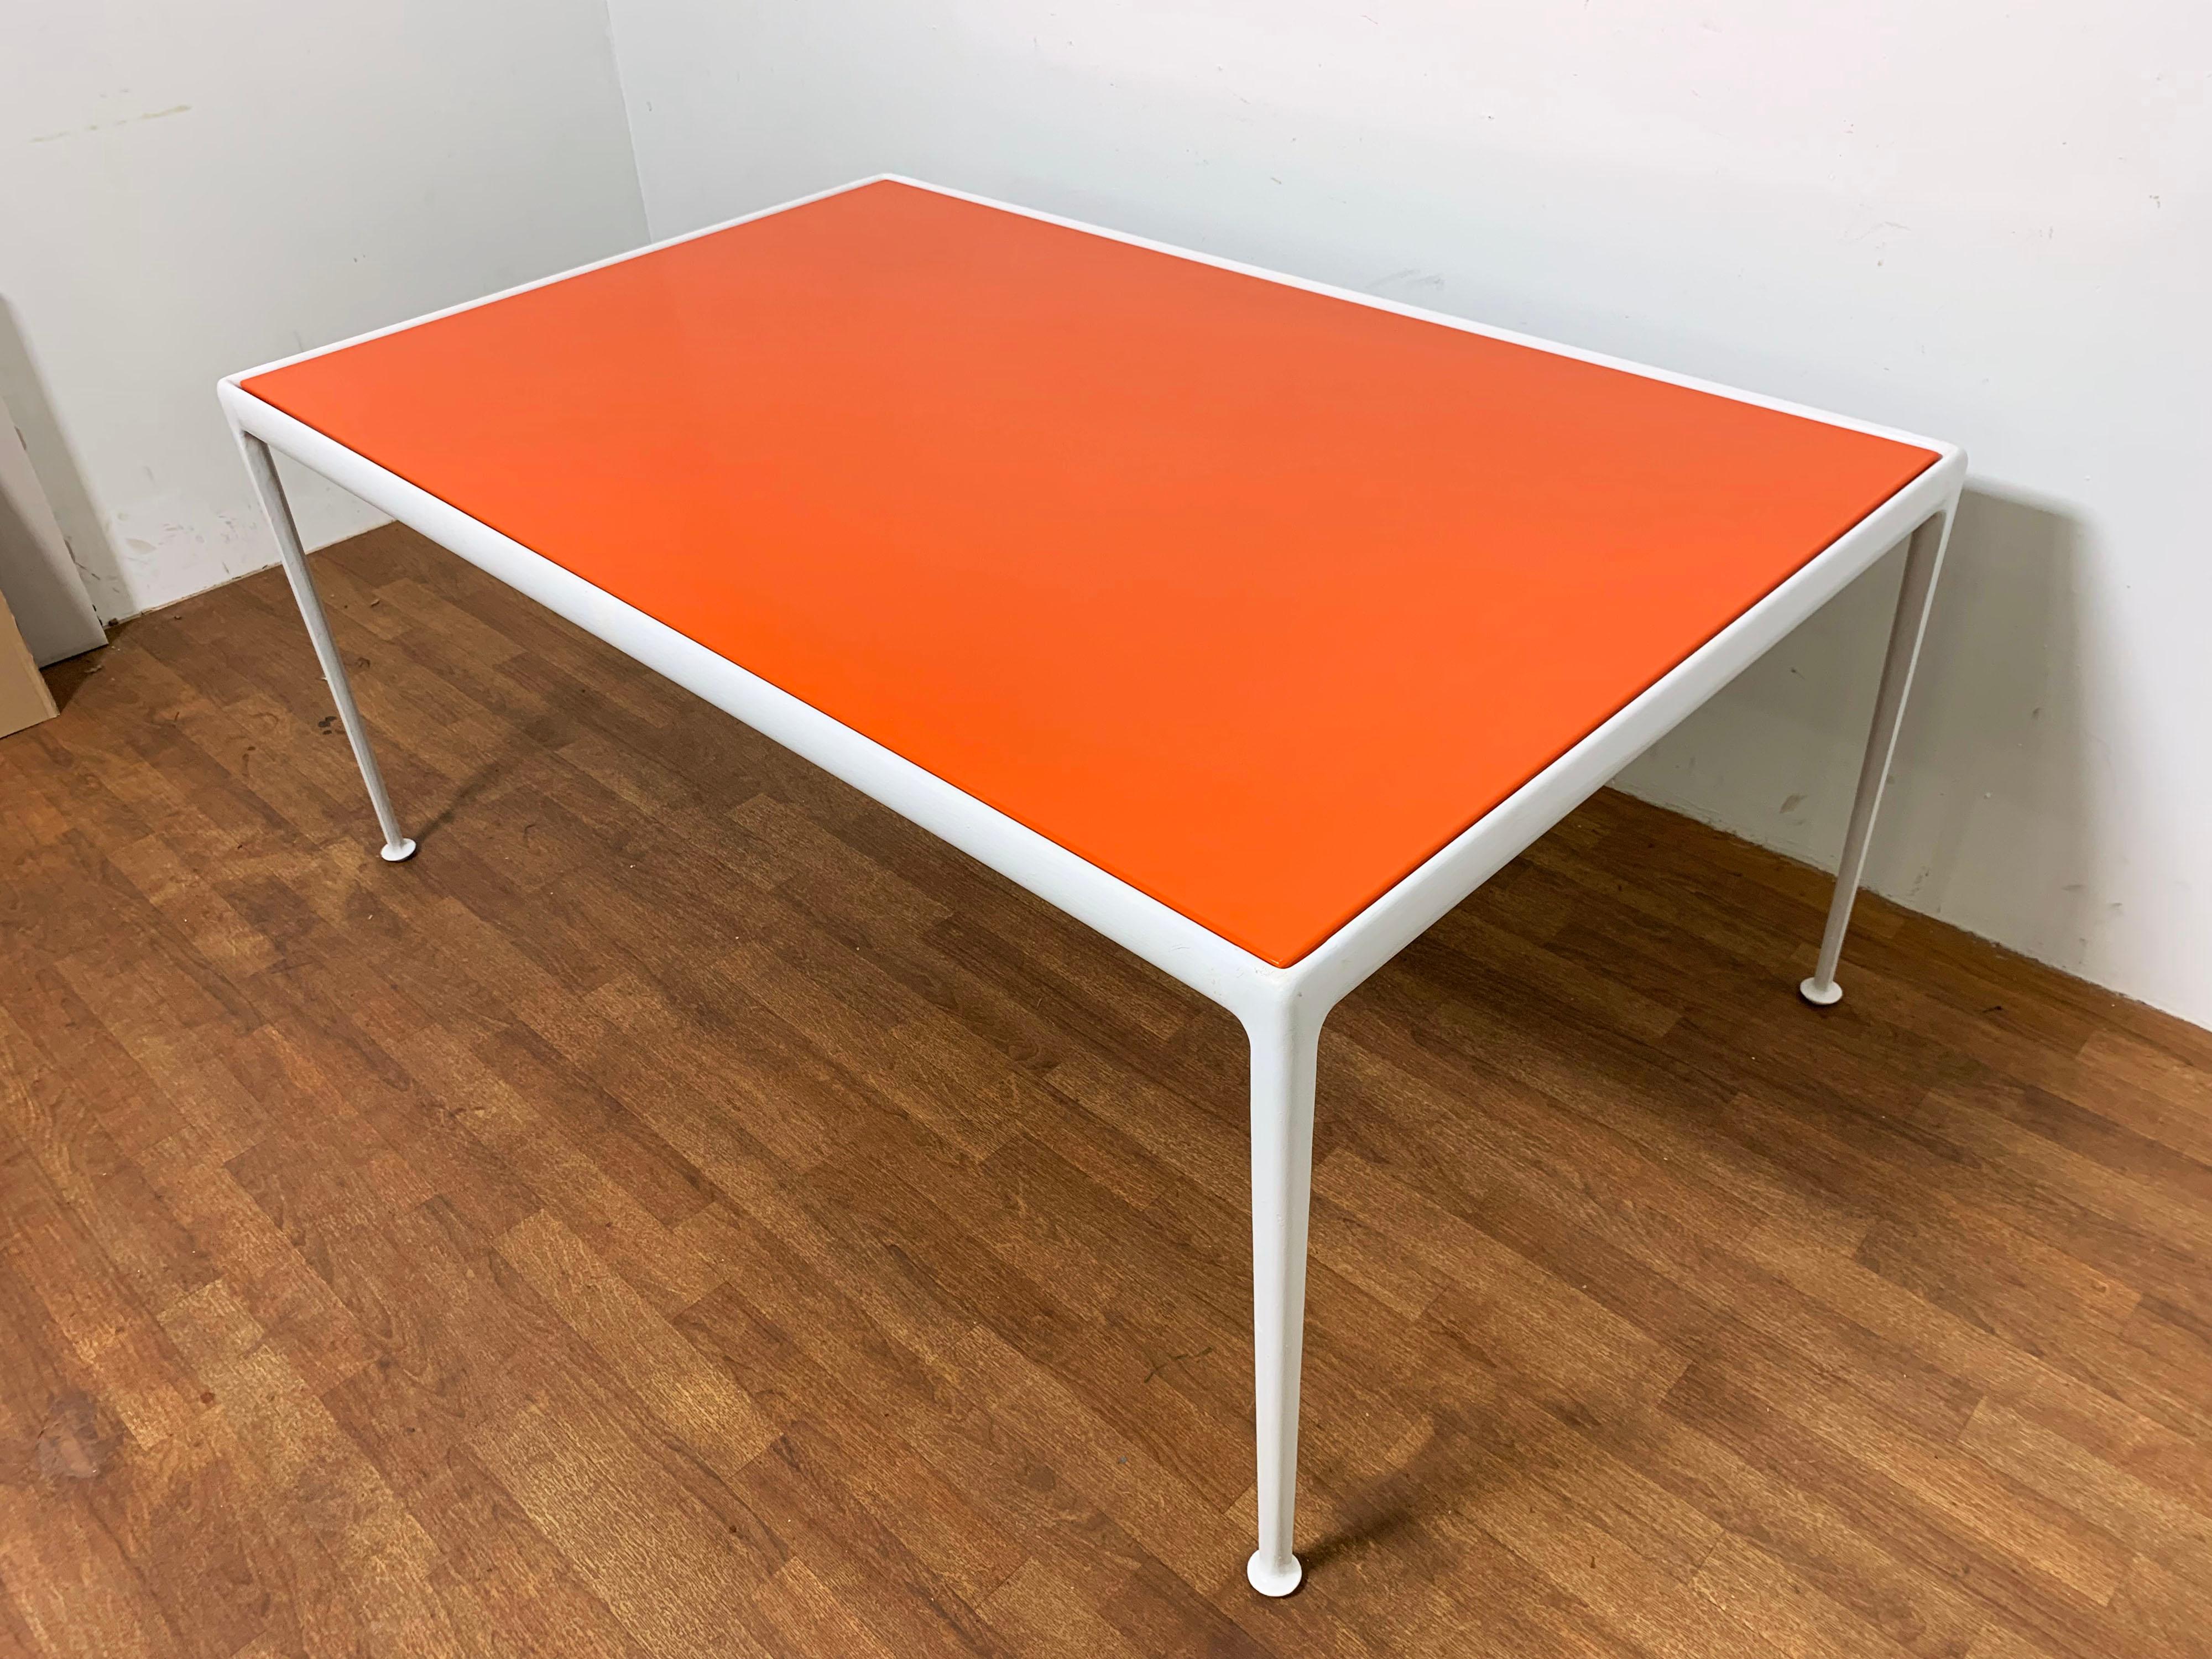 An outdoor dining table with orange enamel top from Richard Schultz’s 1966 aluminum Leisure Collection for Knoll, with four side chairs from the same series. Purchased in 1968, prior owner kept dining set in her solarium, never used outdoors.